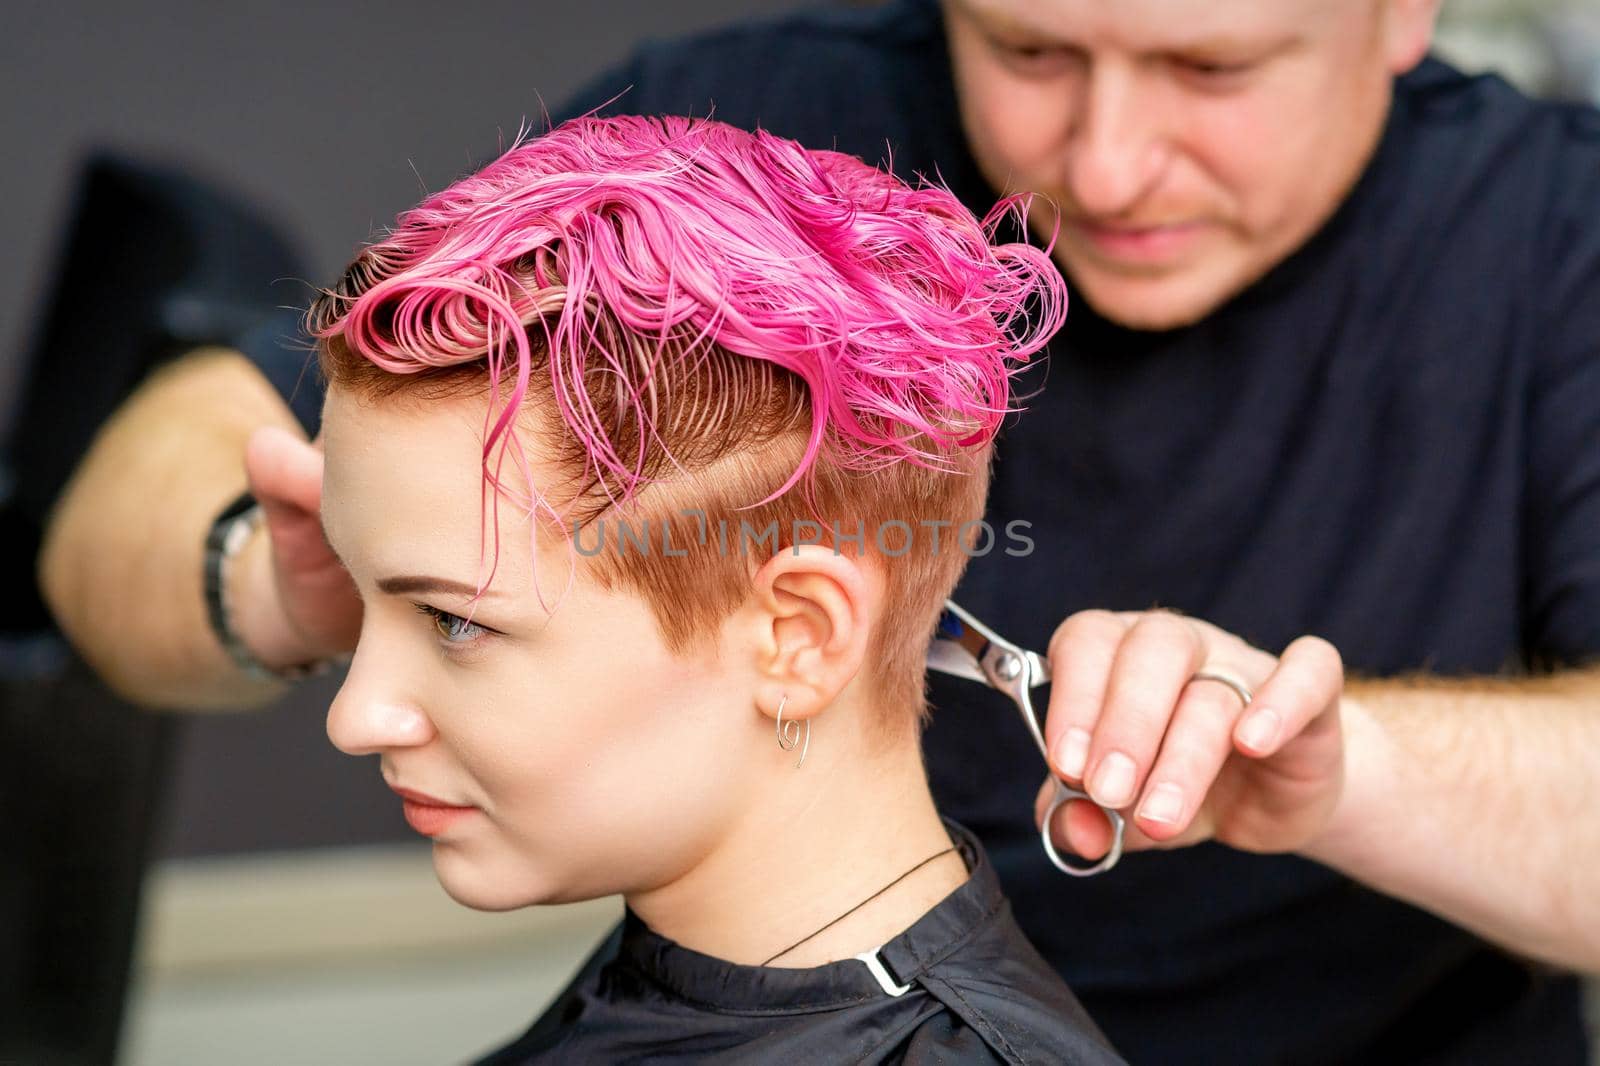 Woman having a new haircut. A male hairstylist is cutting dyed pink short hair with scissors in a hair salon